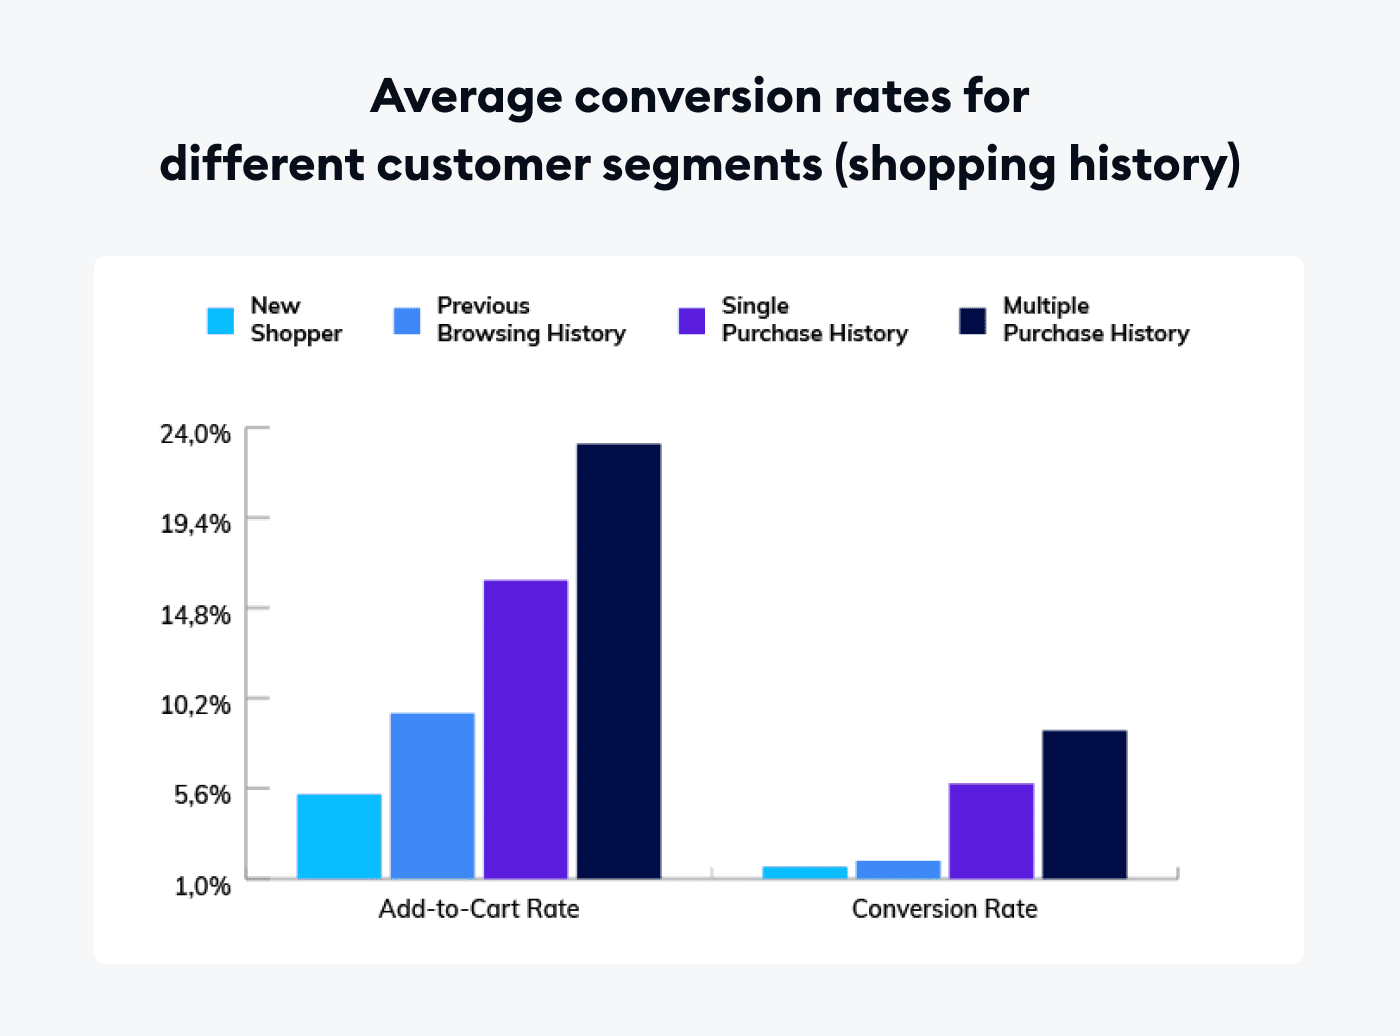 avg conversion rates for different customer segments